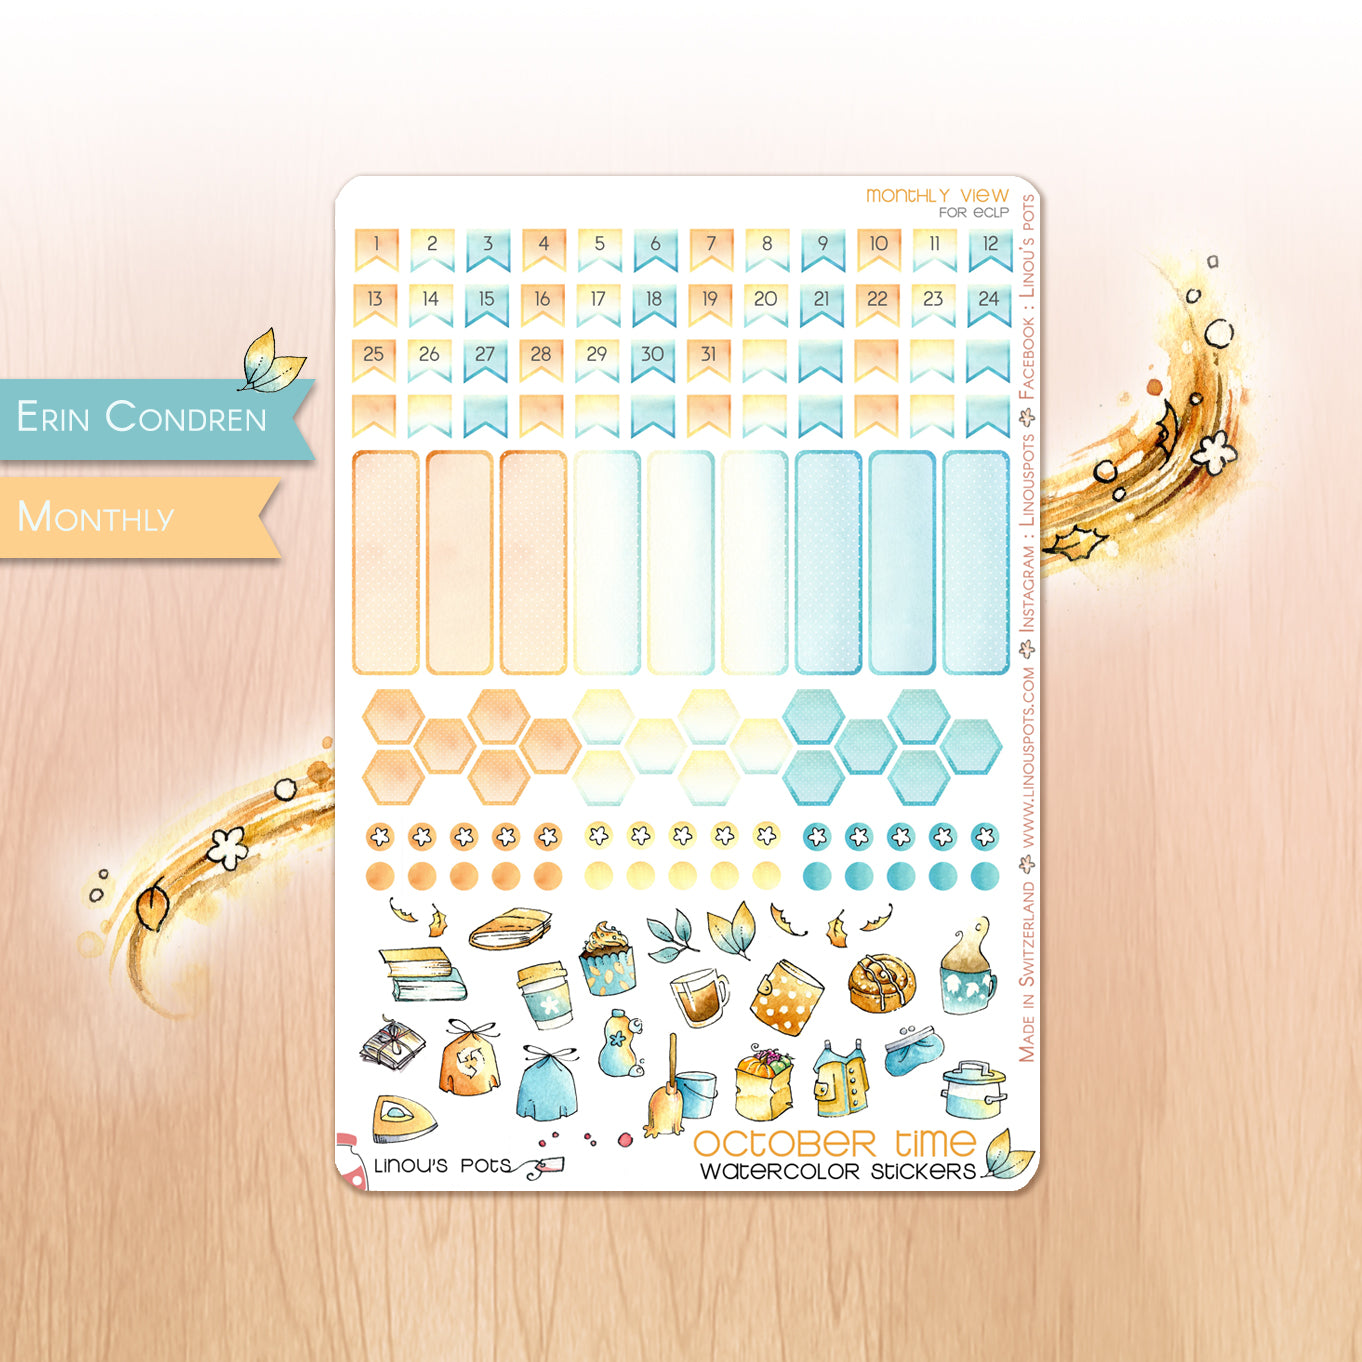 Monthly quarter boxes stickers for Erin Condren - Fall theme